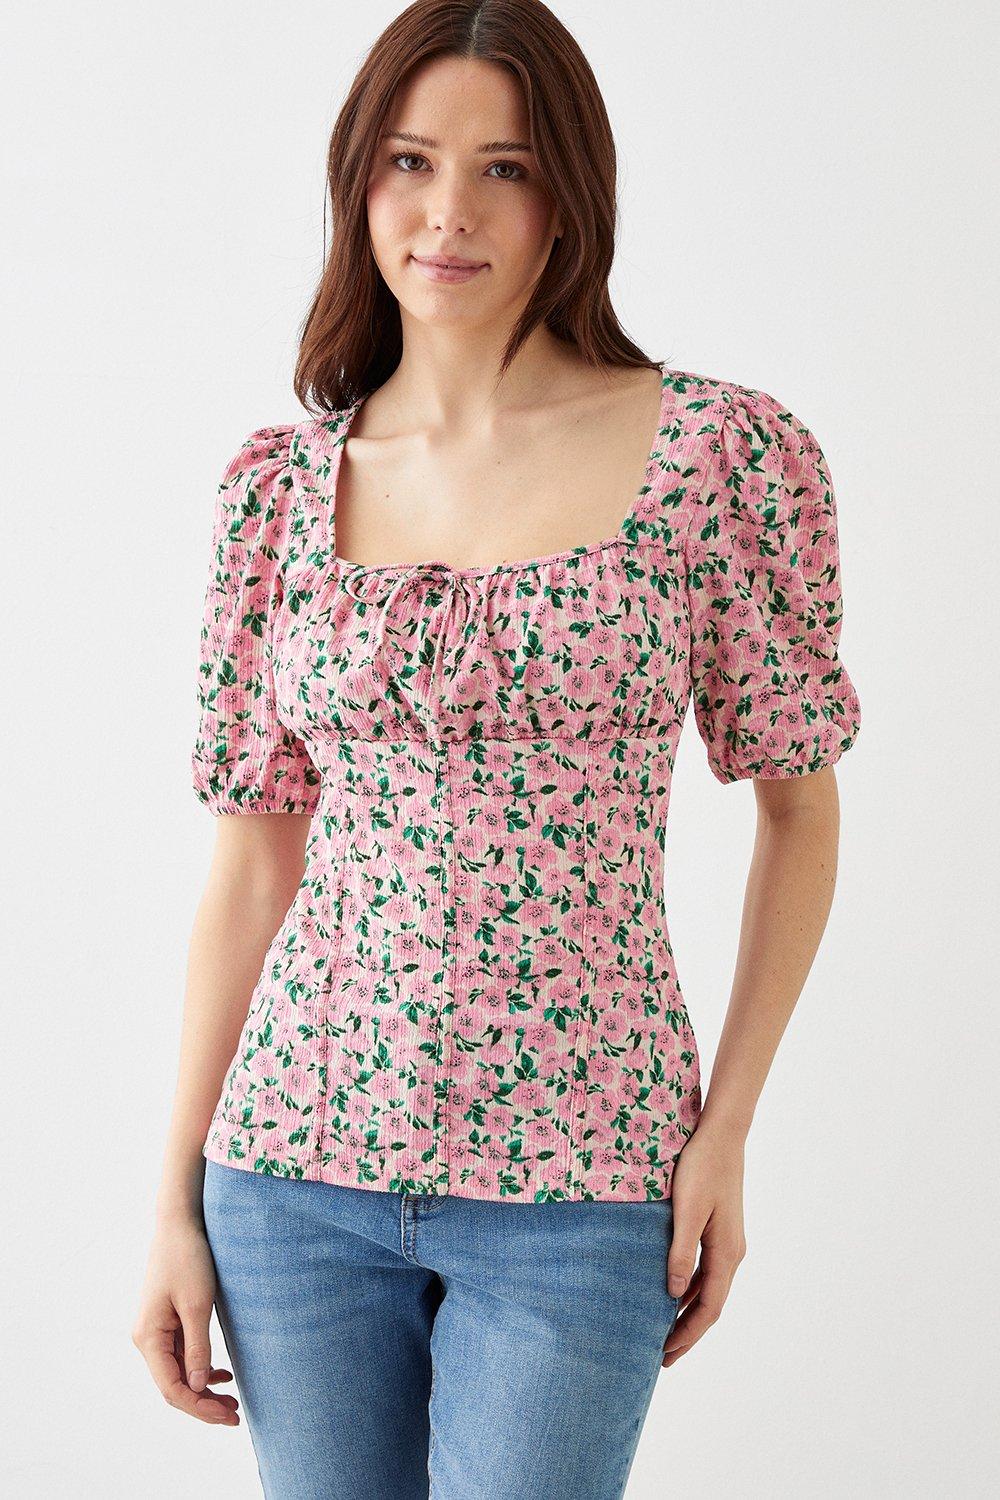 Women’s Floral Puff Sleeve Square Neck Top - rose - L